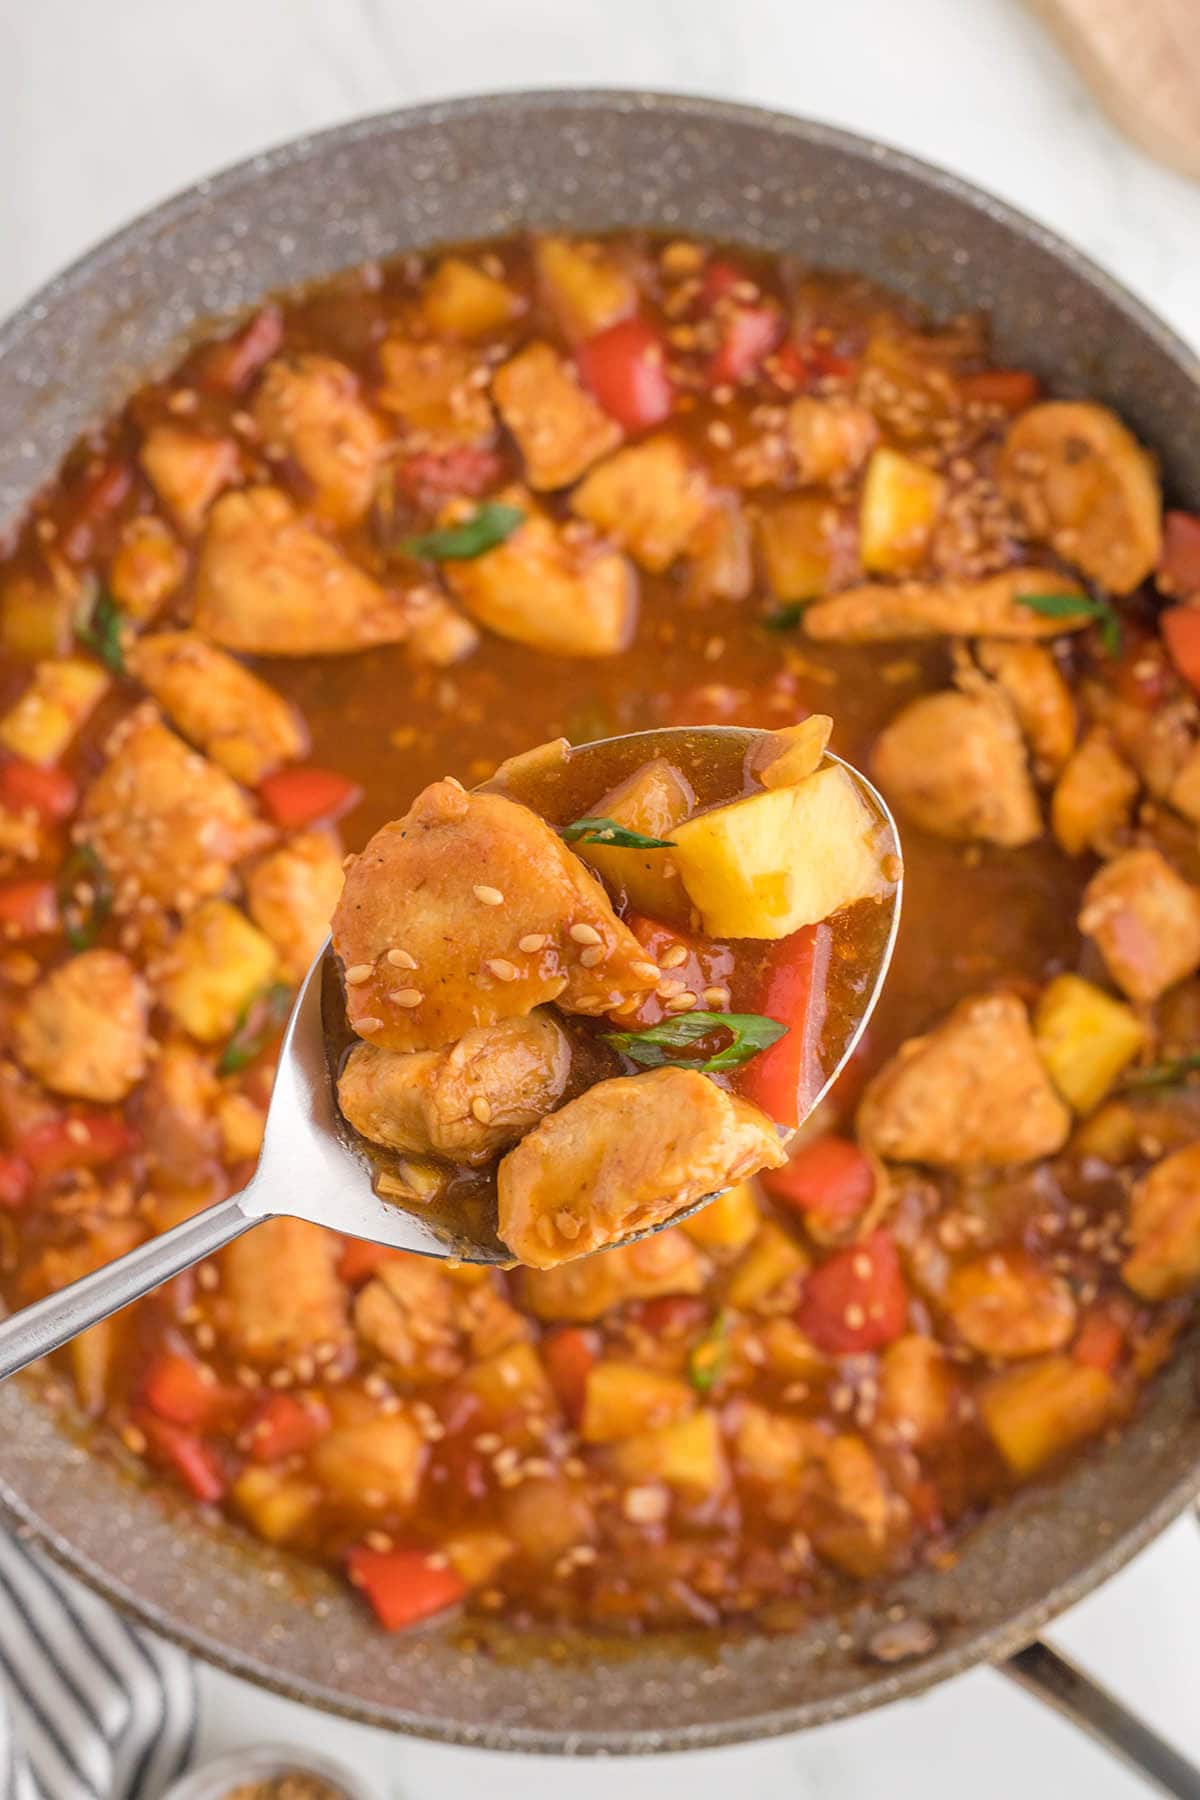 Overhead shot of pan filled with sweet and sour chicken. With a serving spoon.